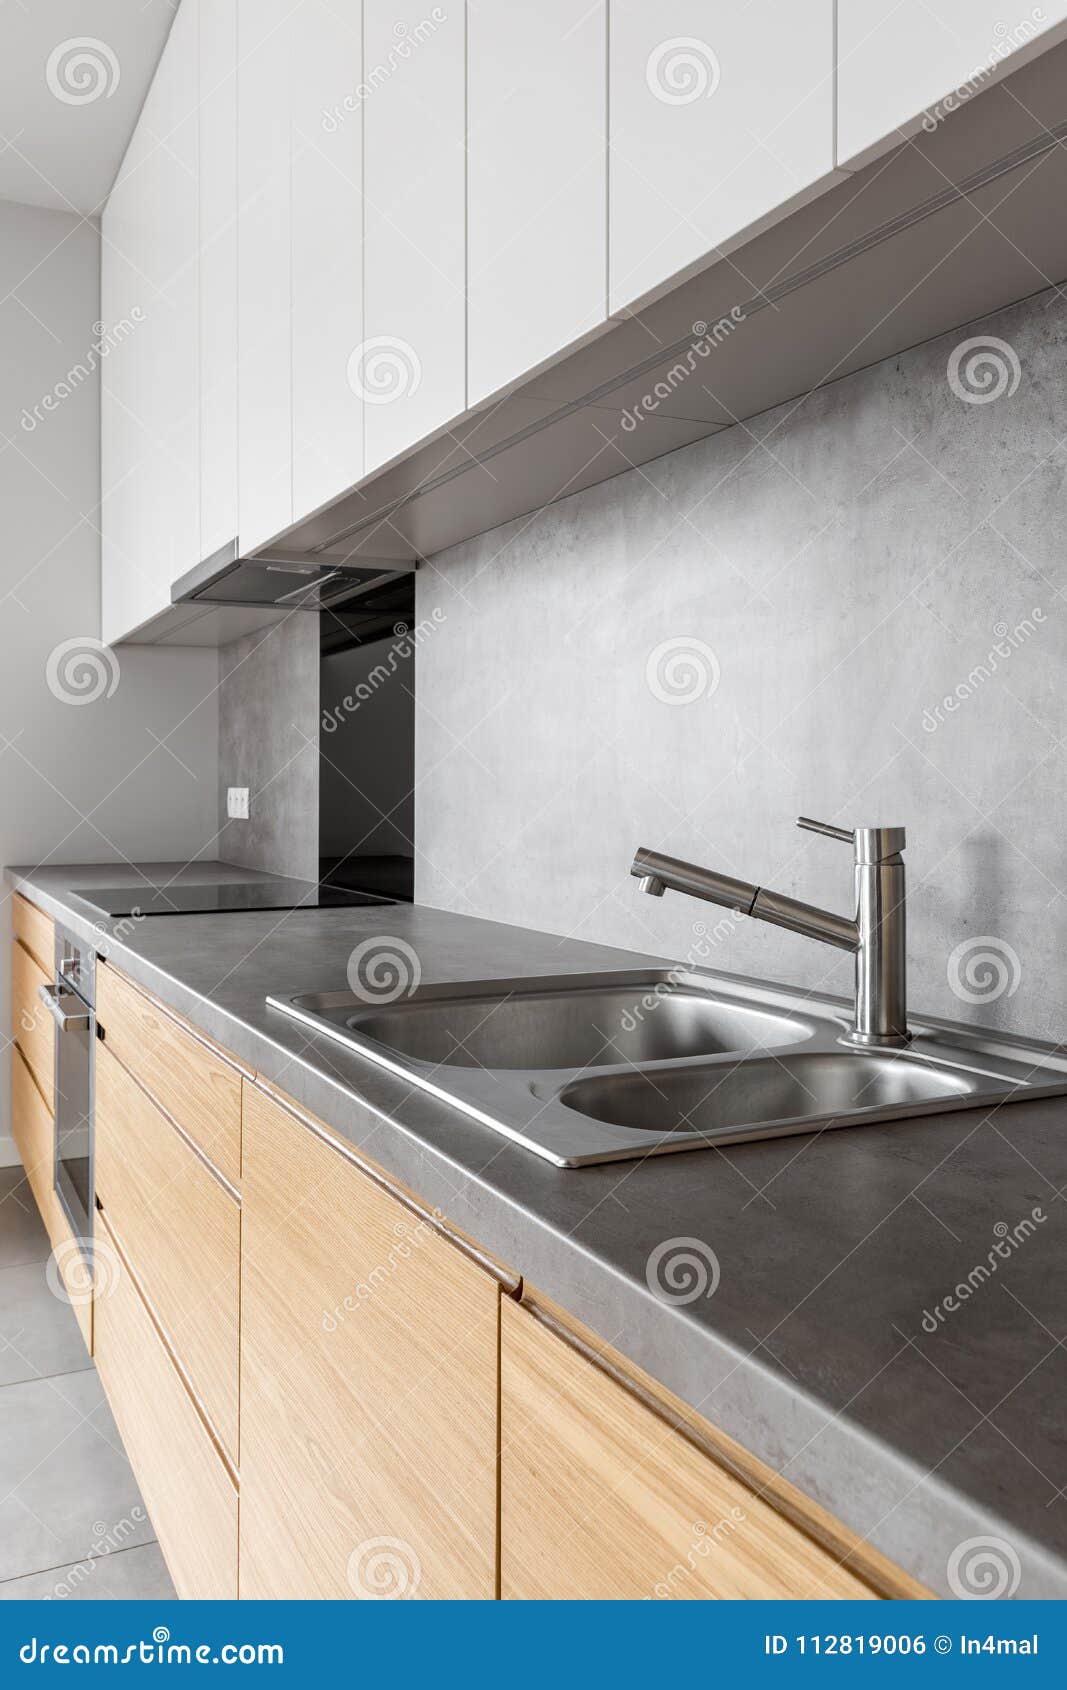 White And Wooden Kitchen Cabinets Stock Photo Image Of Estate Hardwood 112819006